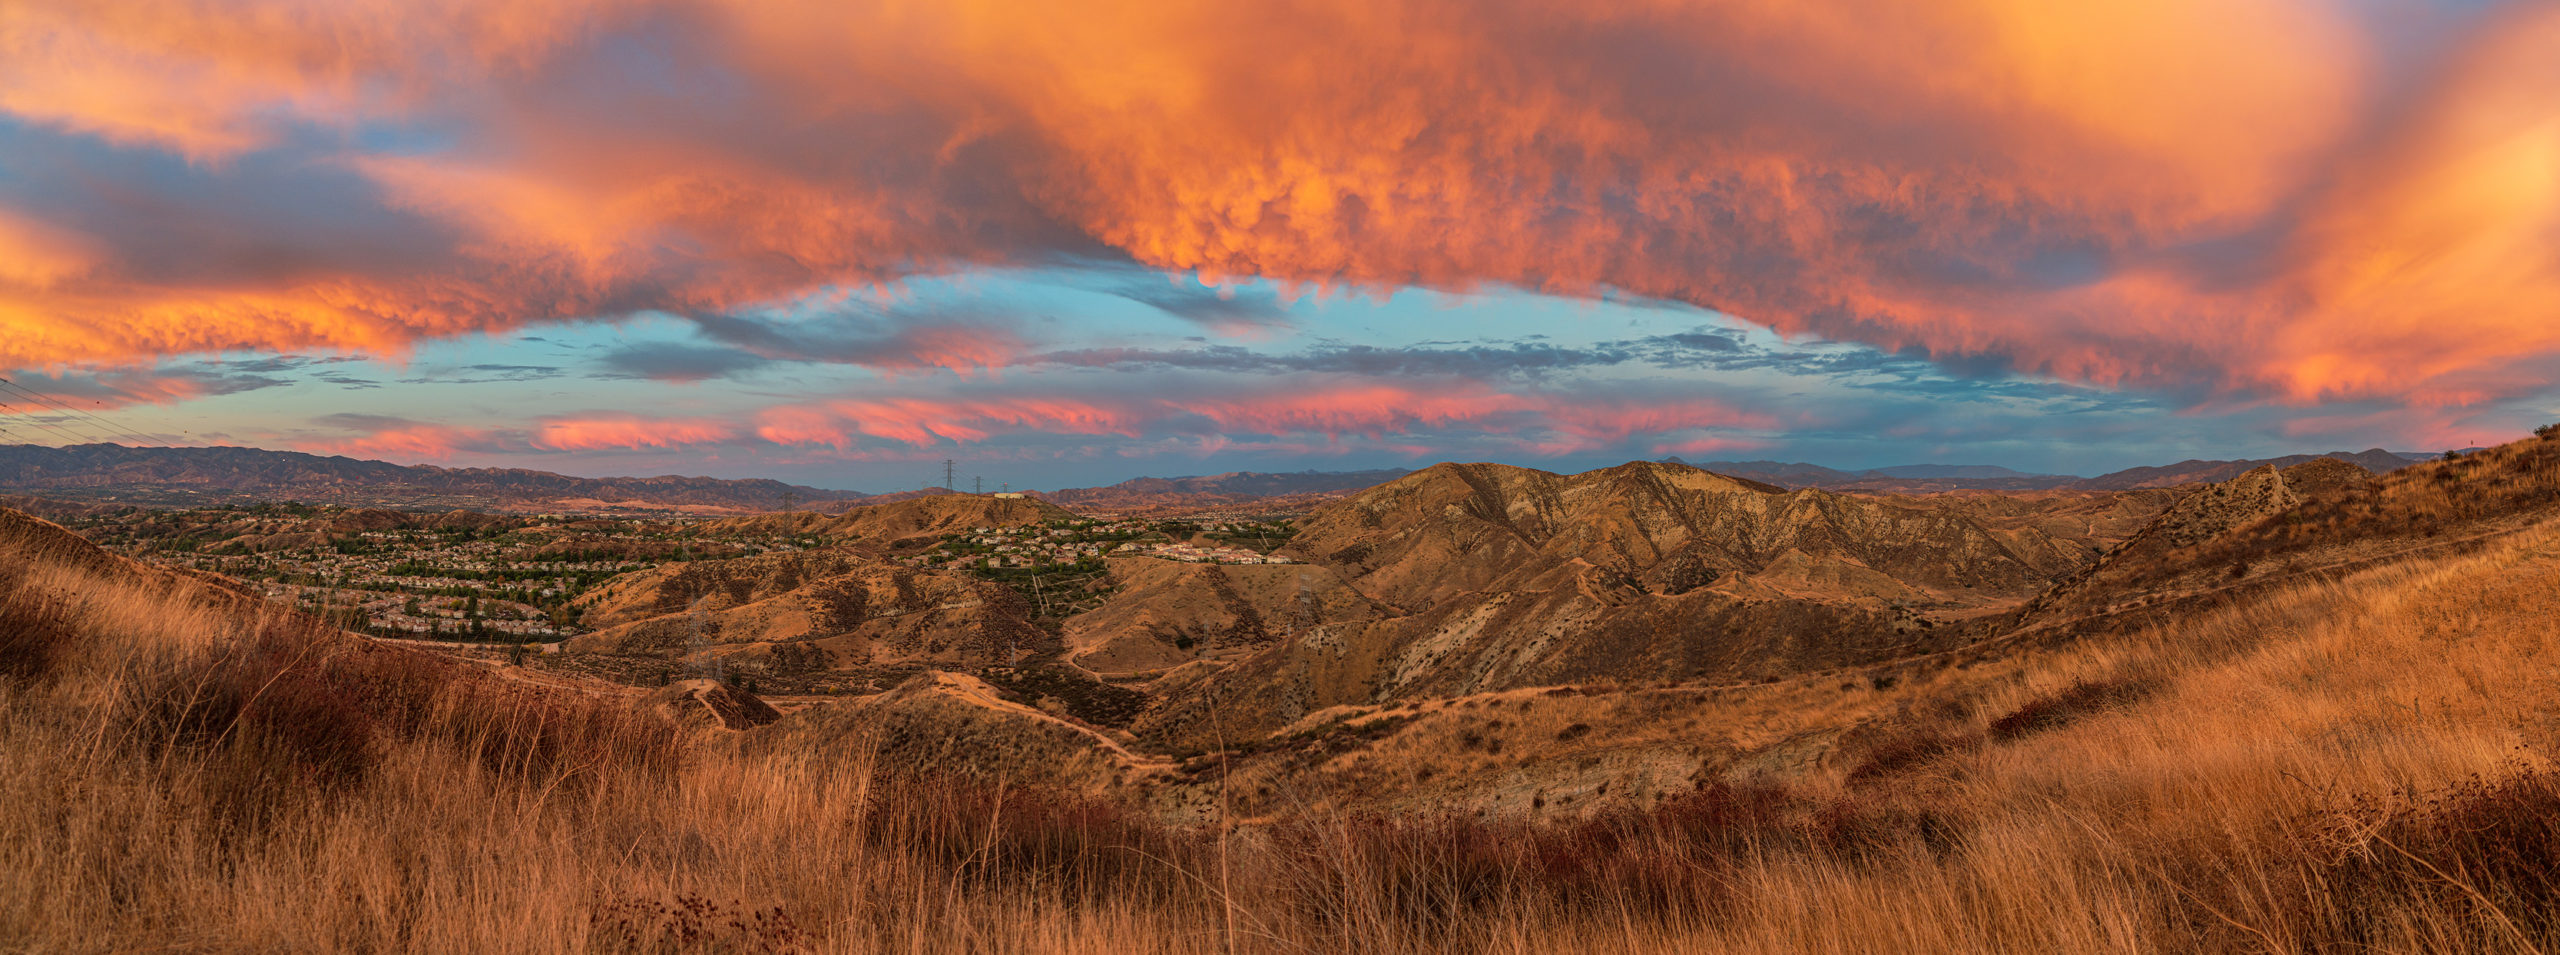 Sky Fire in the Haskell Canyon Open Space